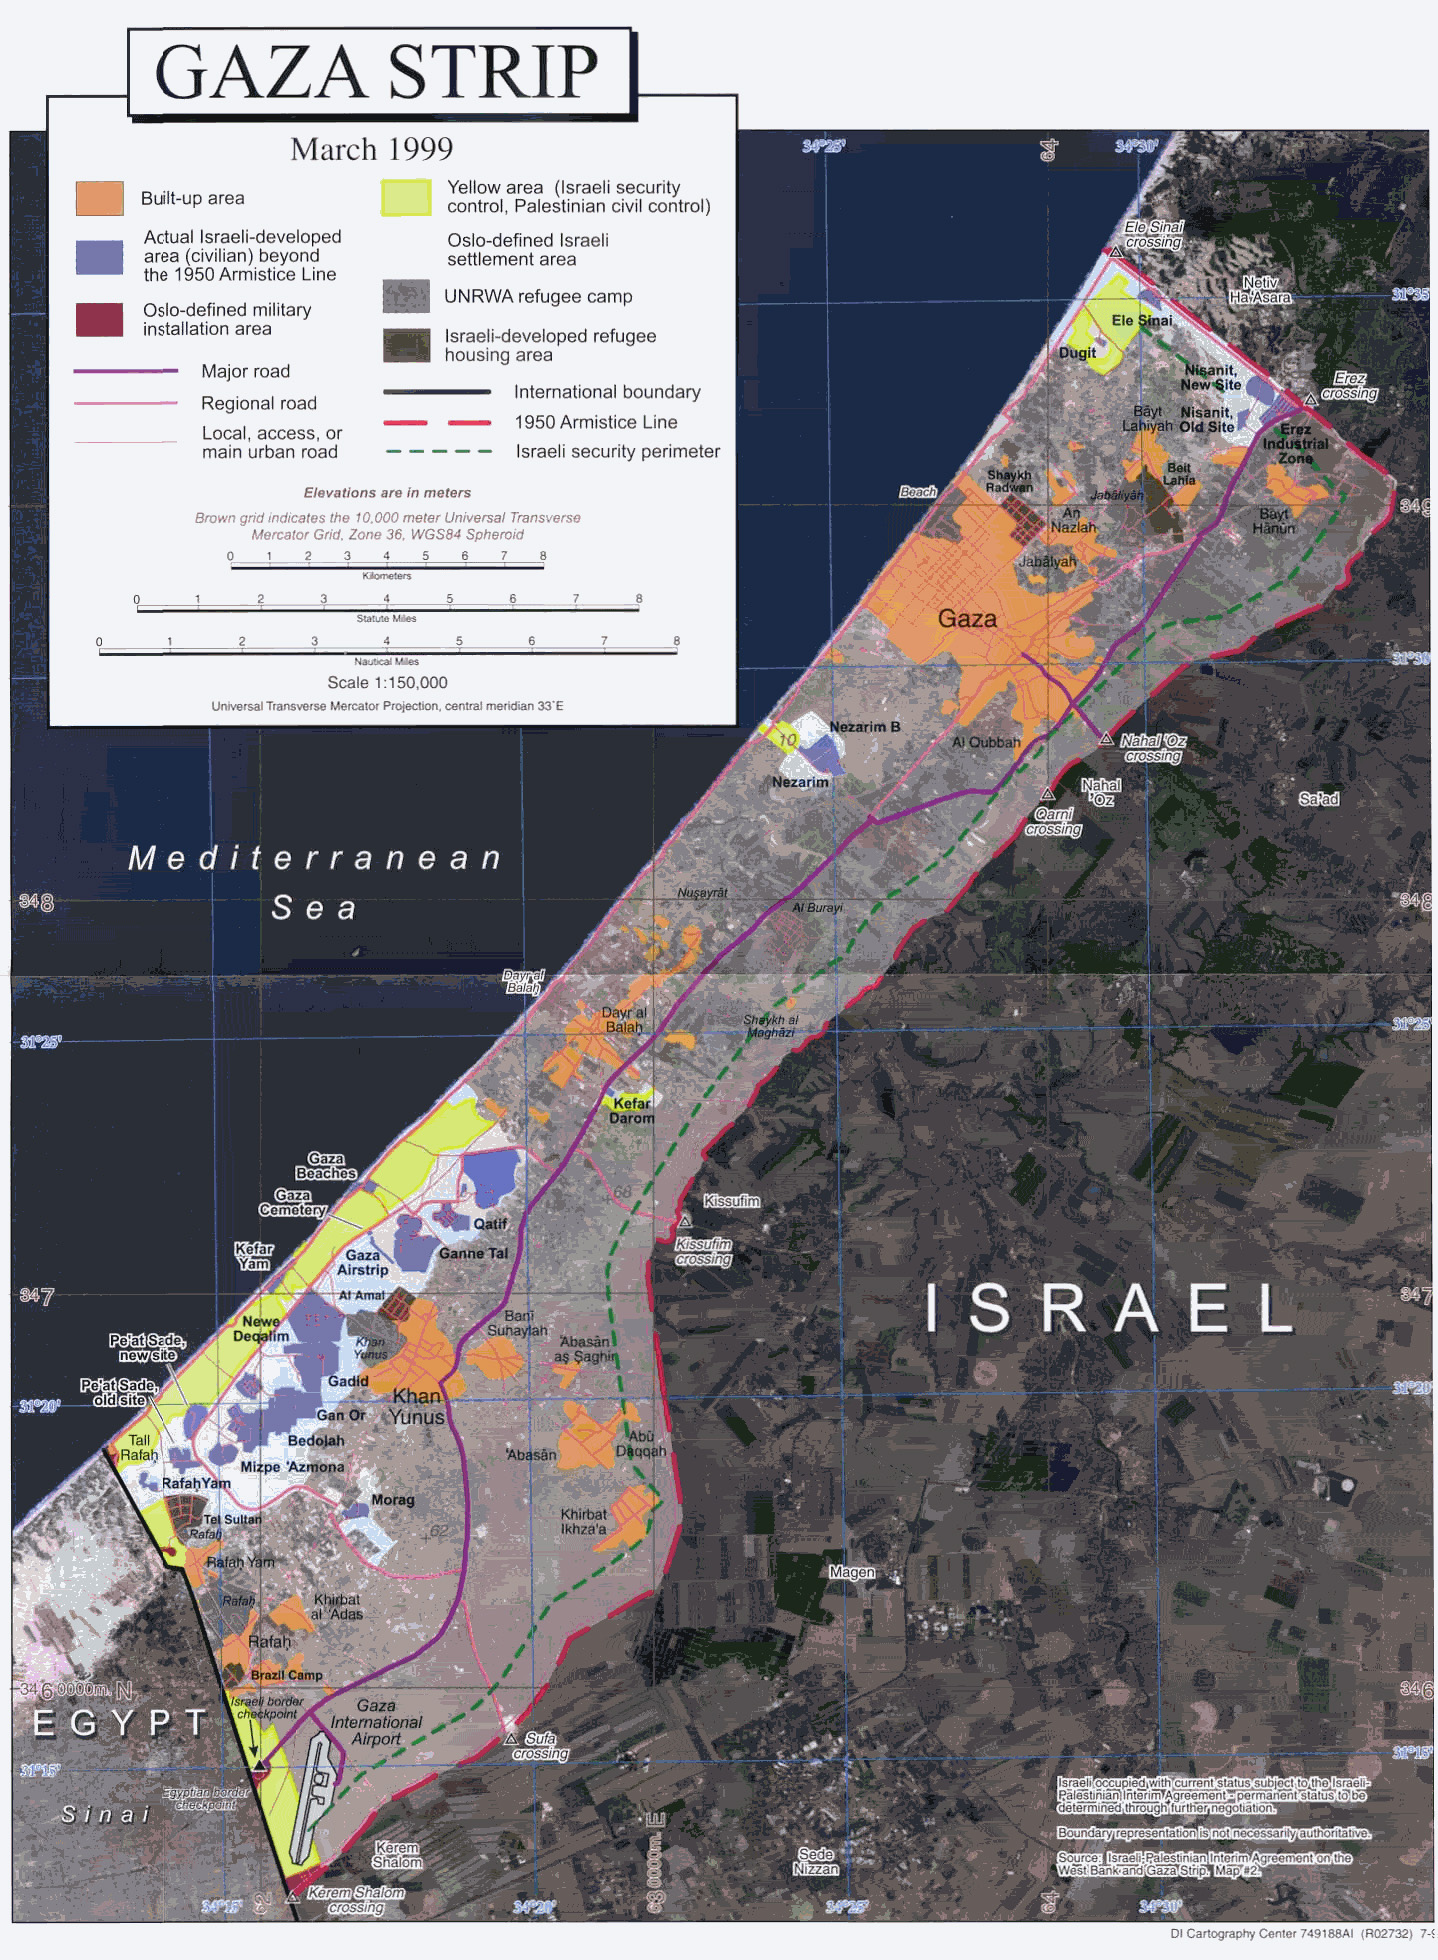 Click here to see a map of Gaza